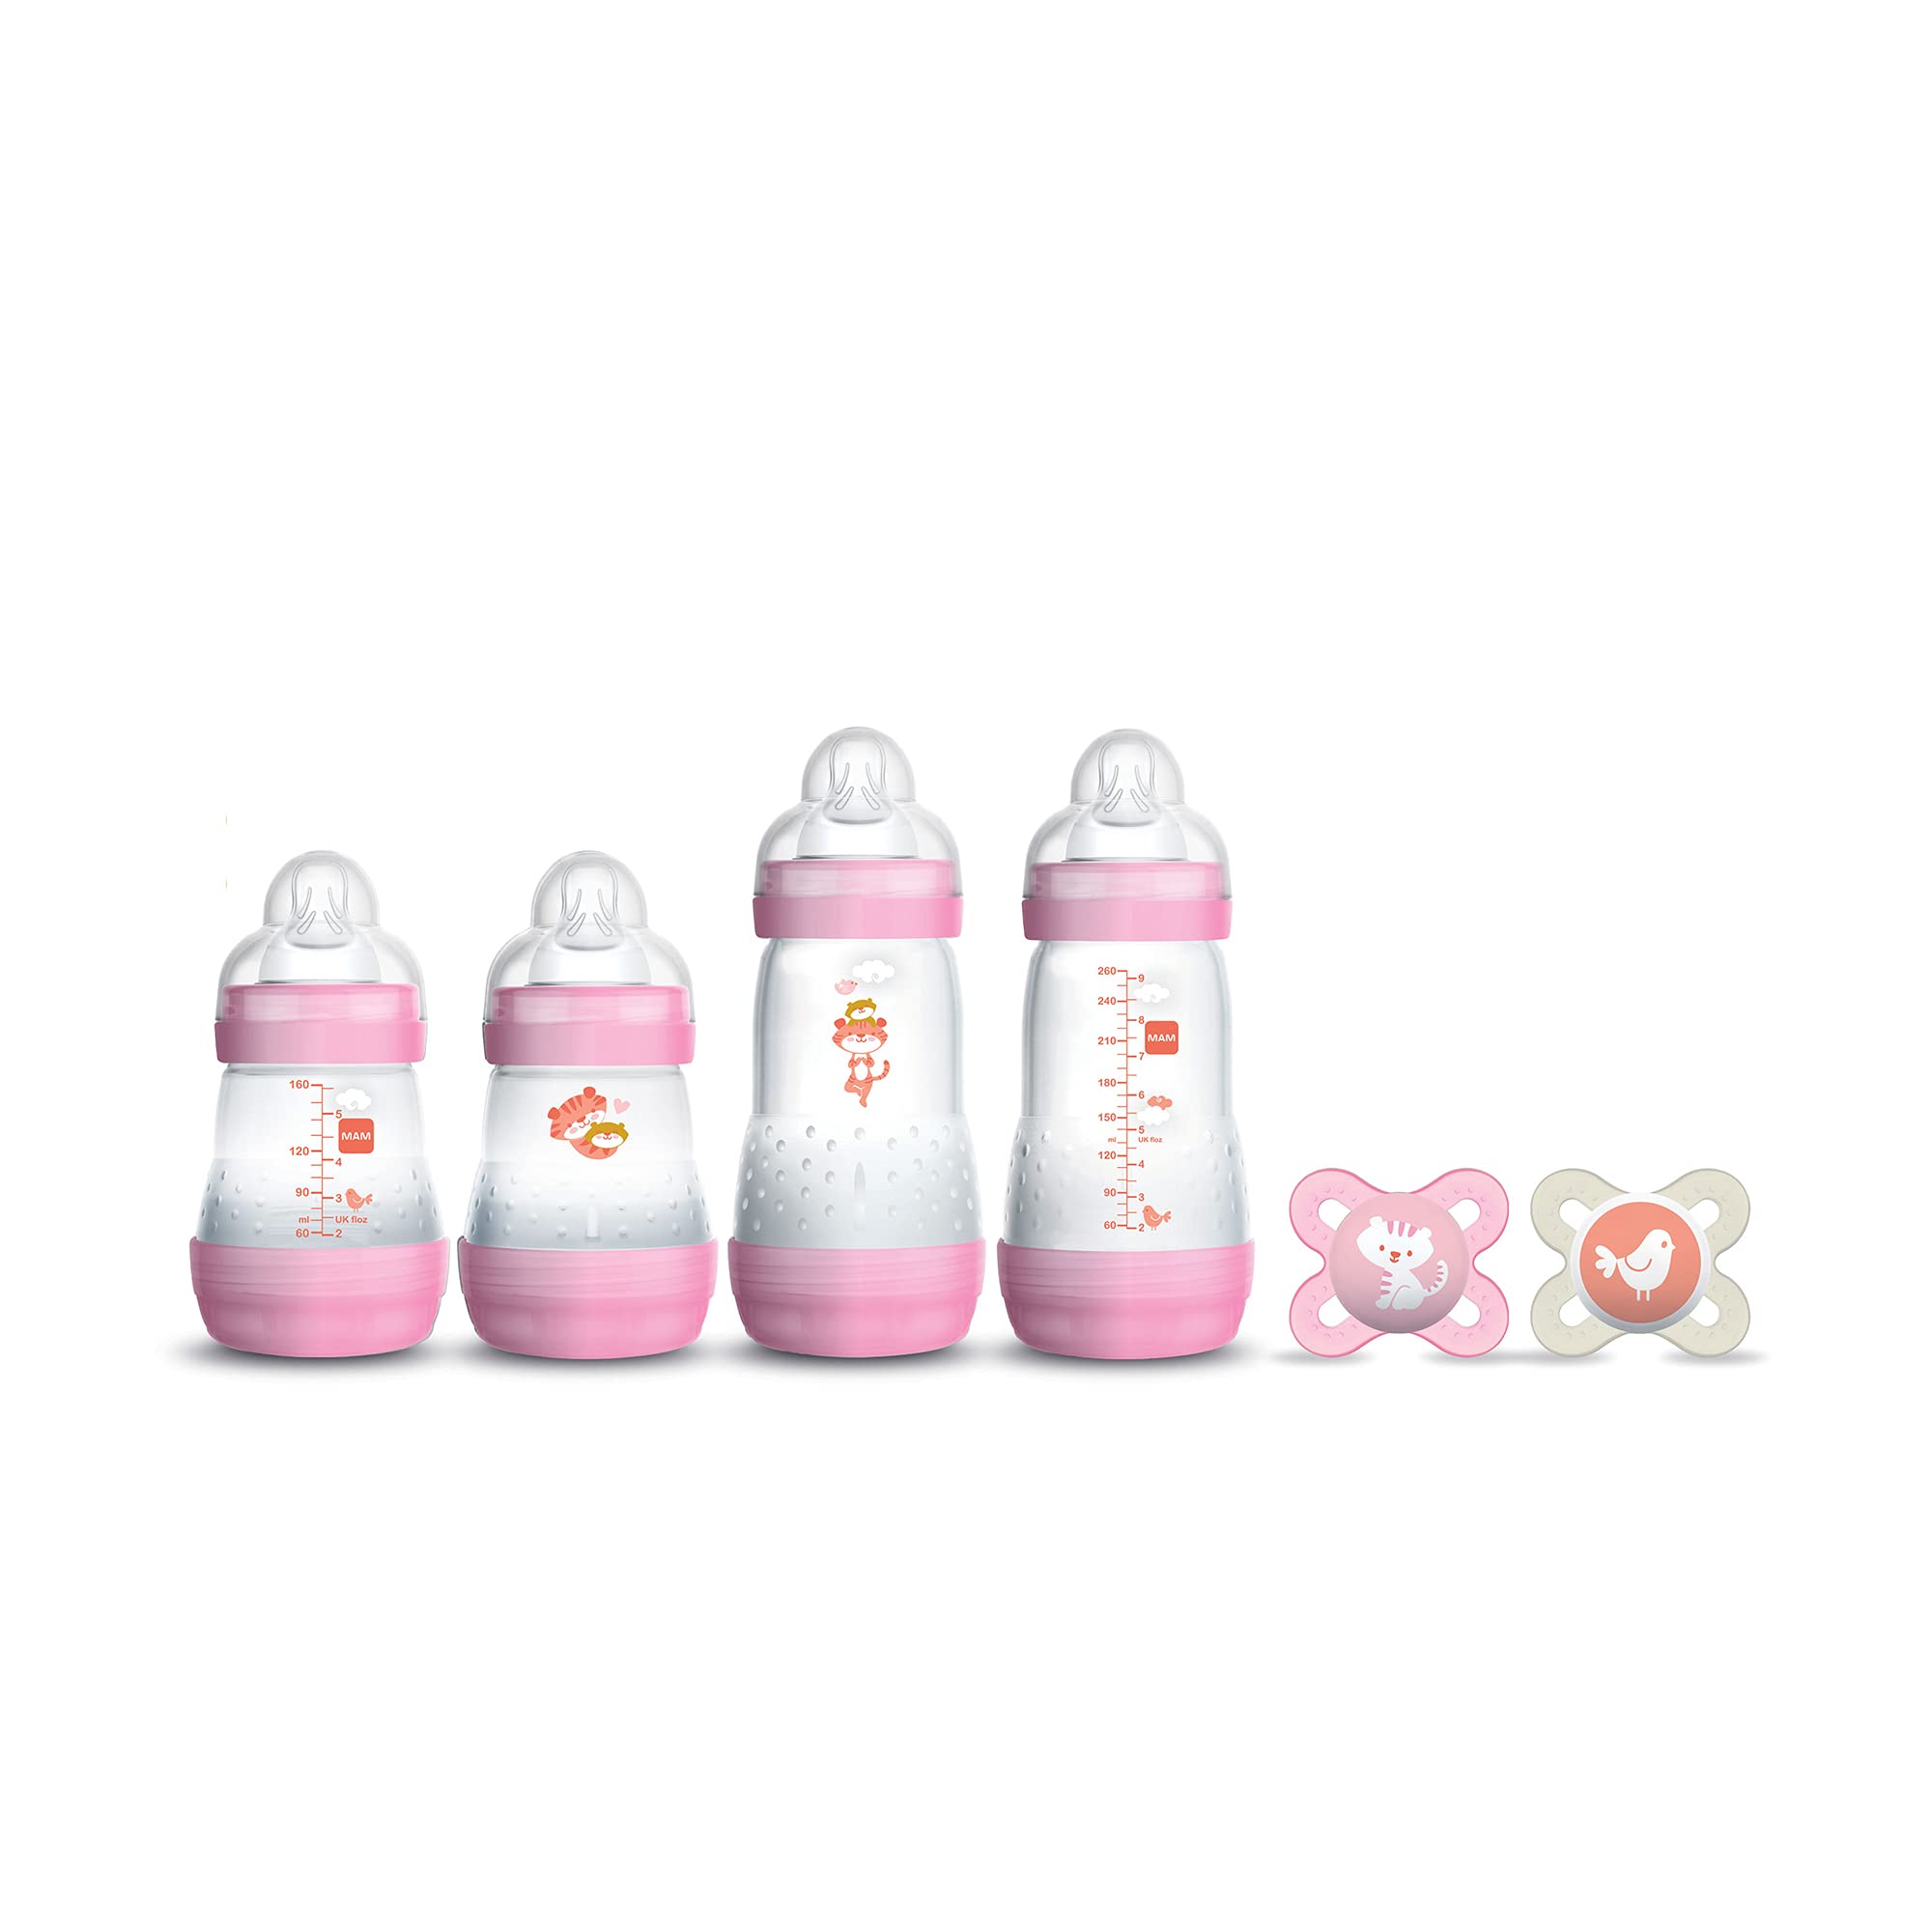 MAM Newborn Essentials Feed & Soothe Set (6-Piece), Easy Start Anti-Colic  Baby Bottles (2 Count 5 oz Bottles, 2 Count 9 oz Bottles), 0-2 Month  Pacifiers, Baby Shower Gifts for Baby Girl, Pink